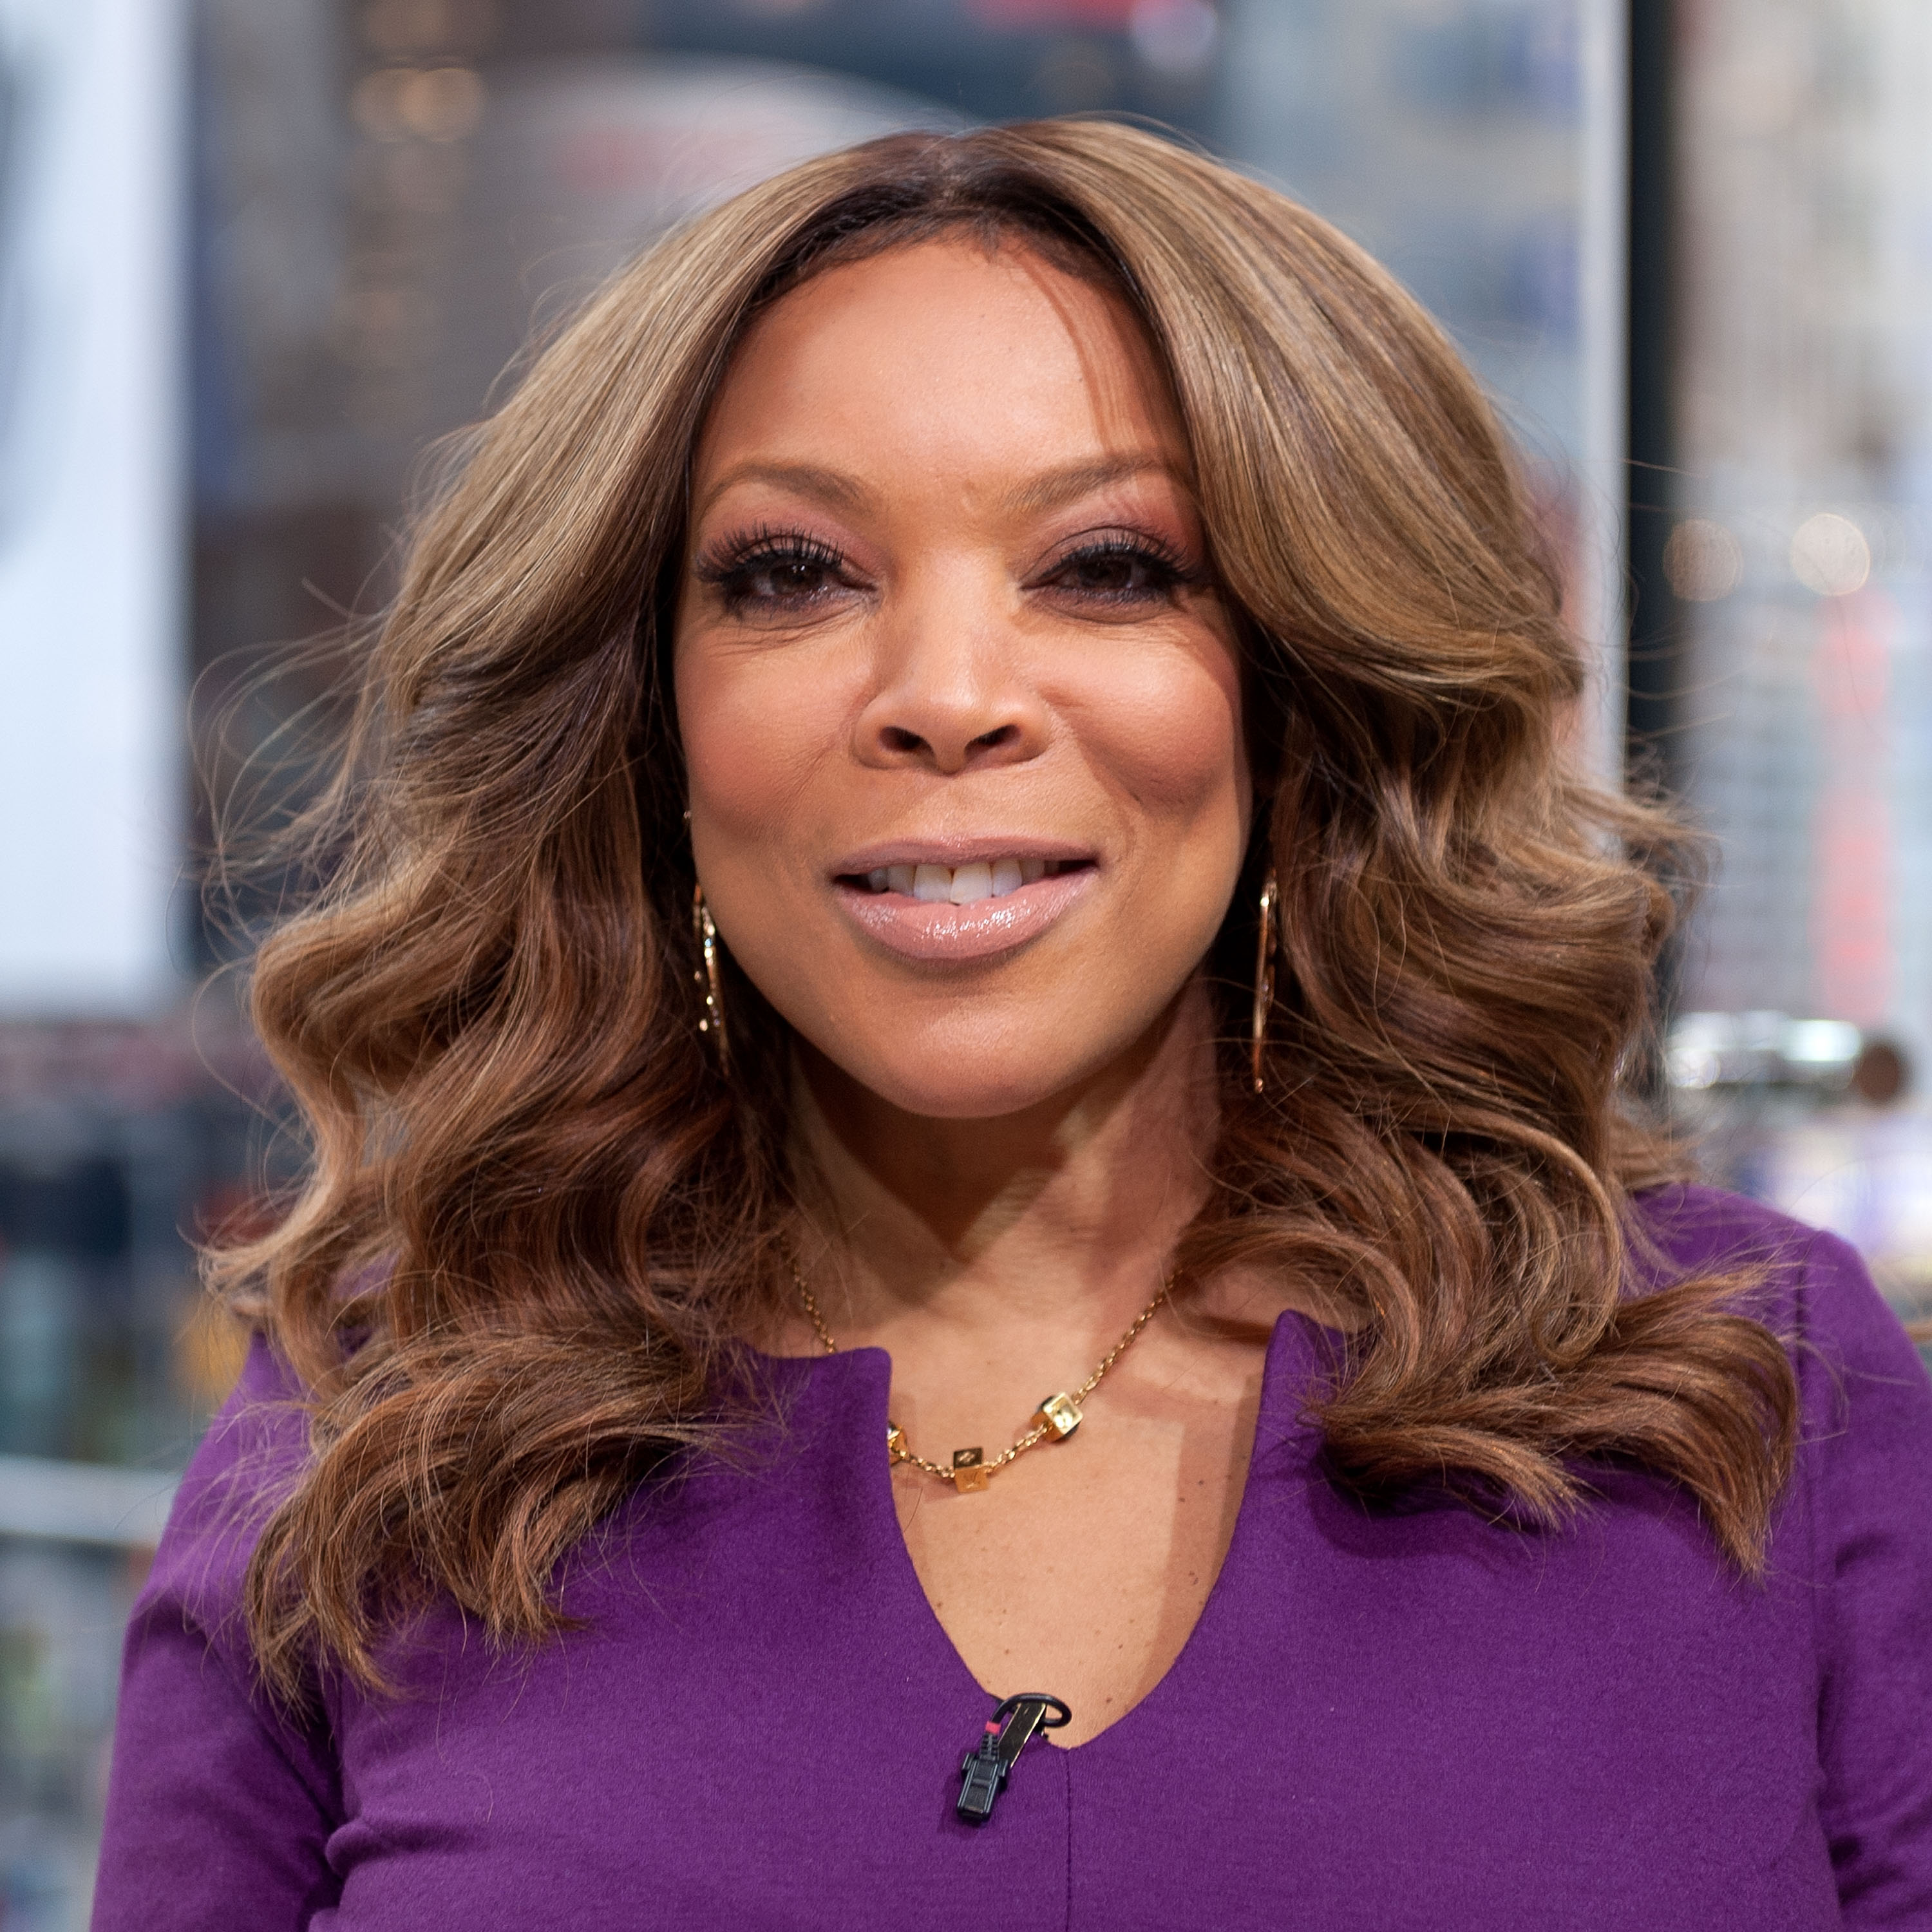 Wendy Williams at the "Extra" studio in New York in January 2015. | Photo: Getty Images